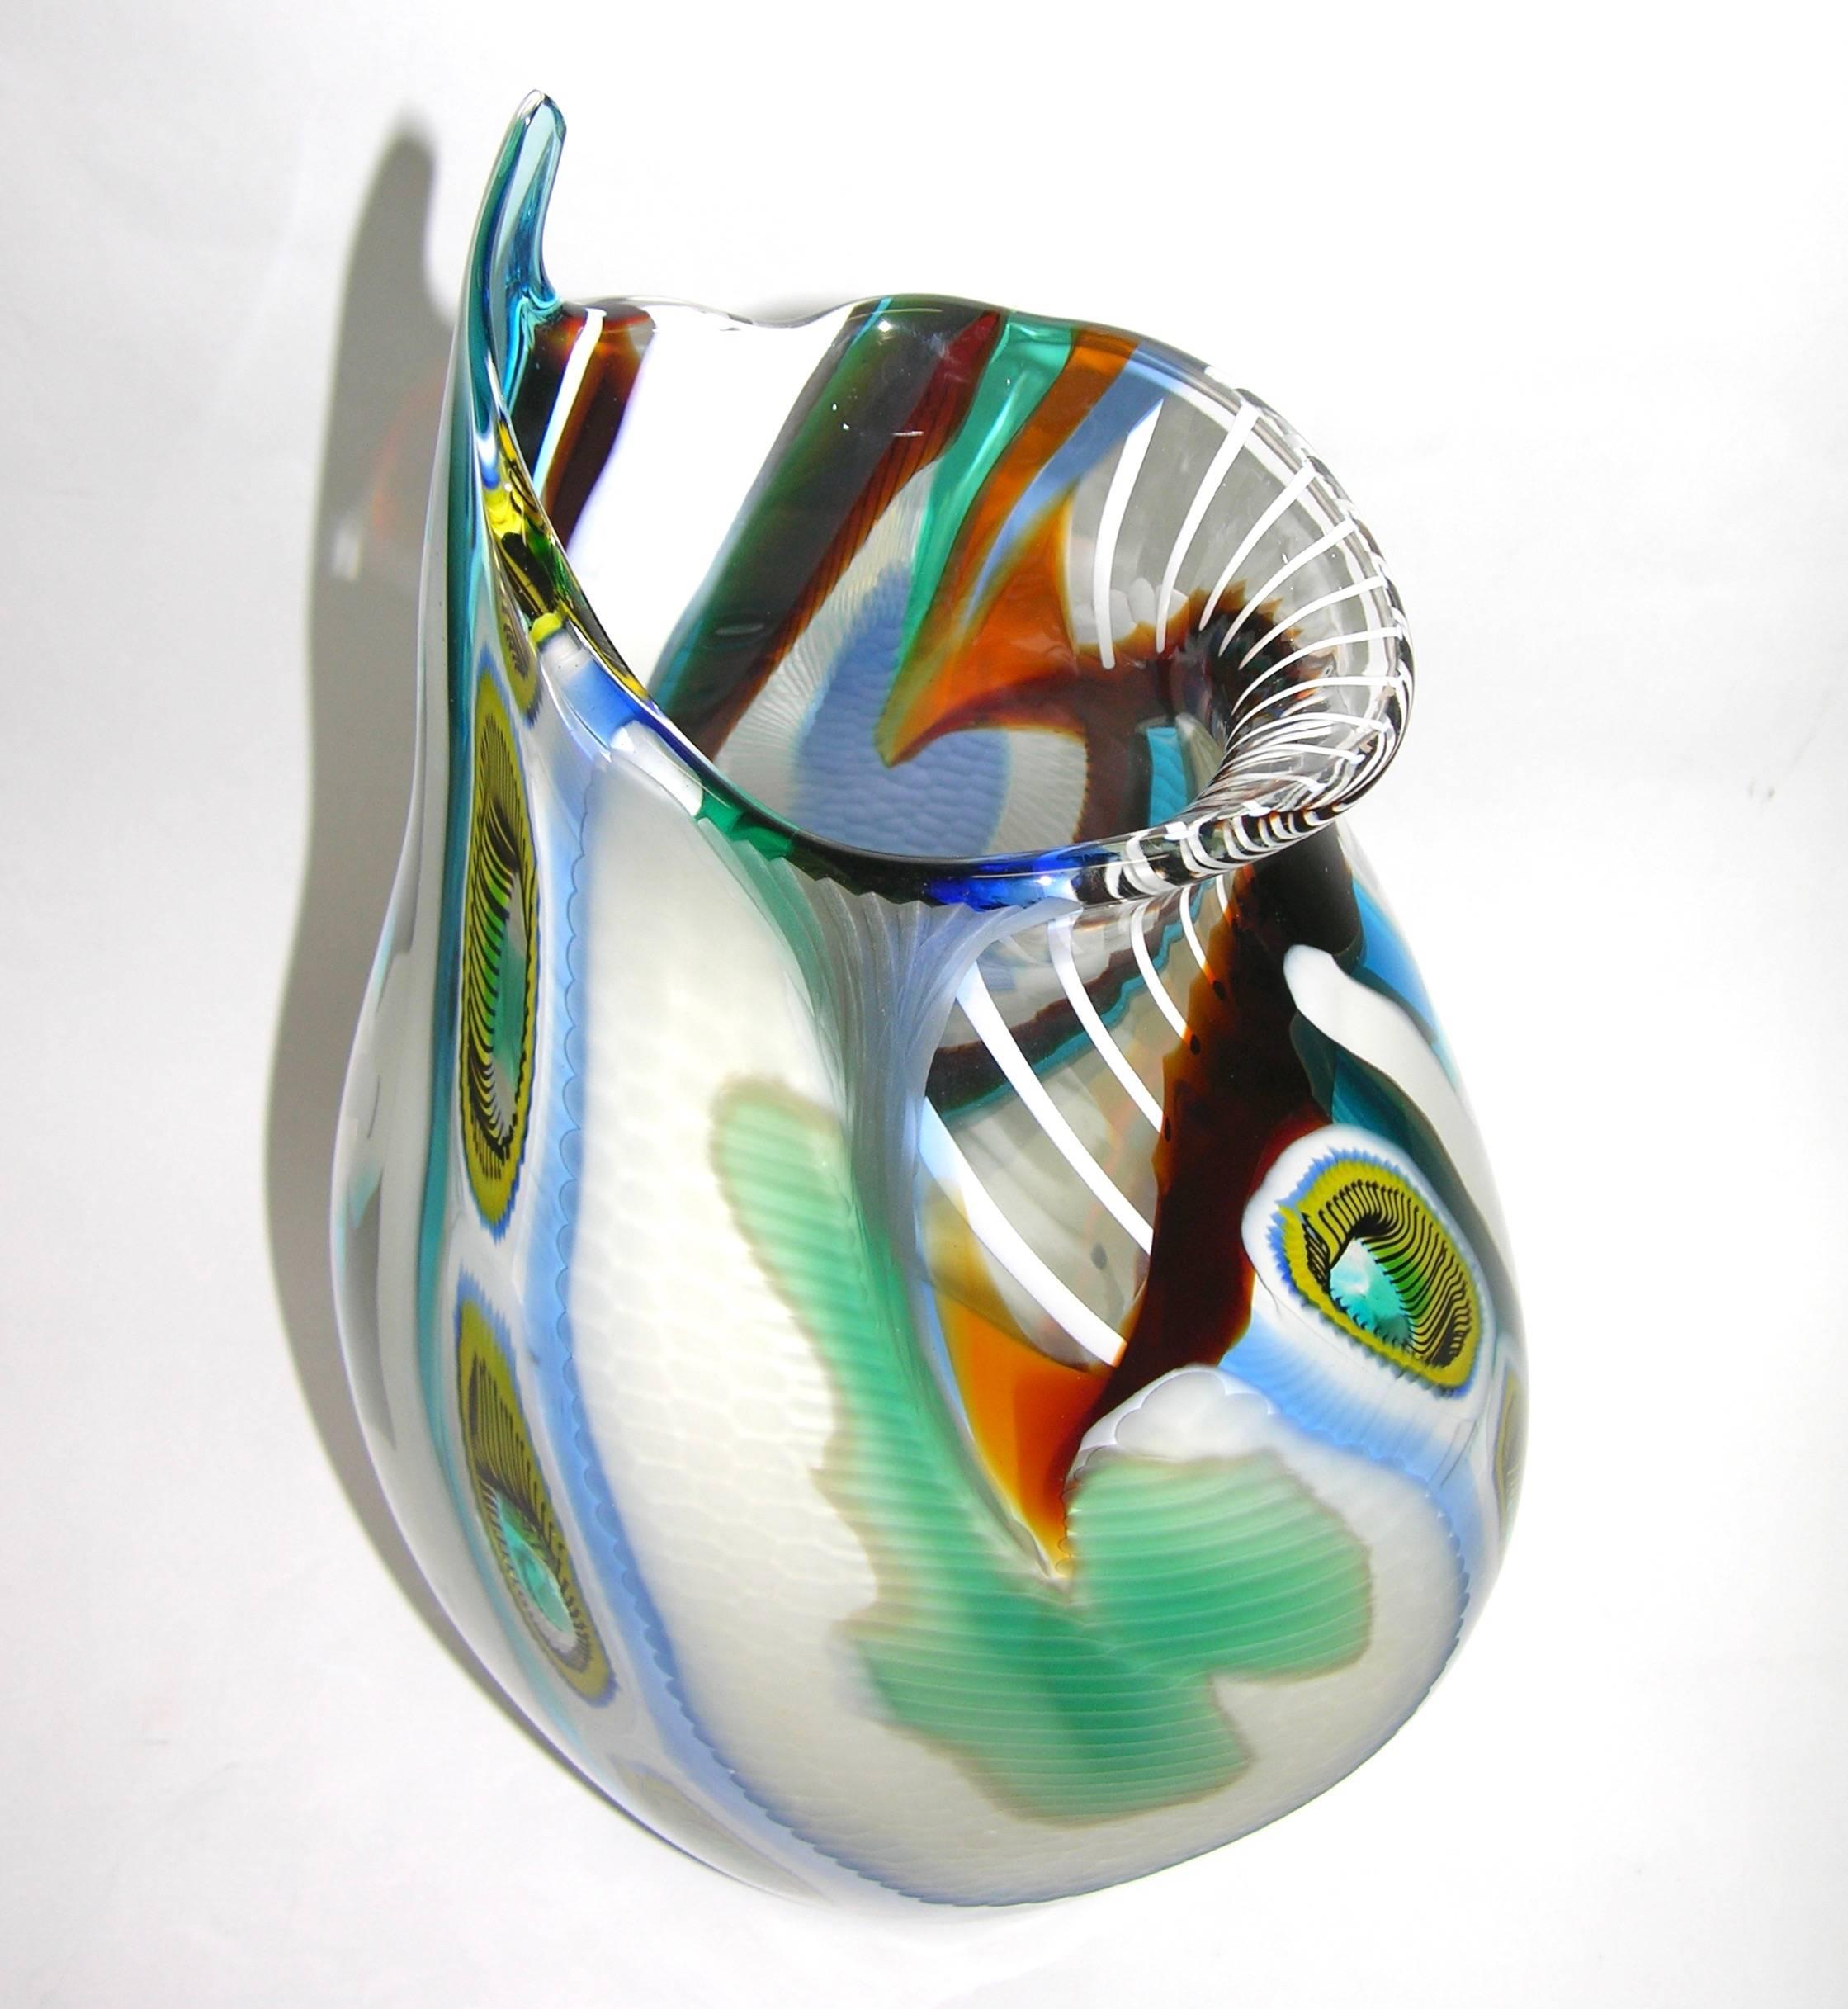 Etched 1990 Afro Celotto Modern Art Glass Bowl with Murrine Exclusive for Seguso